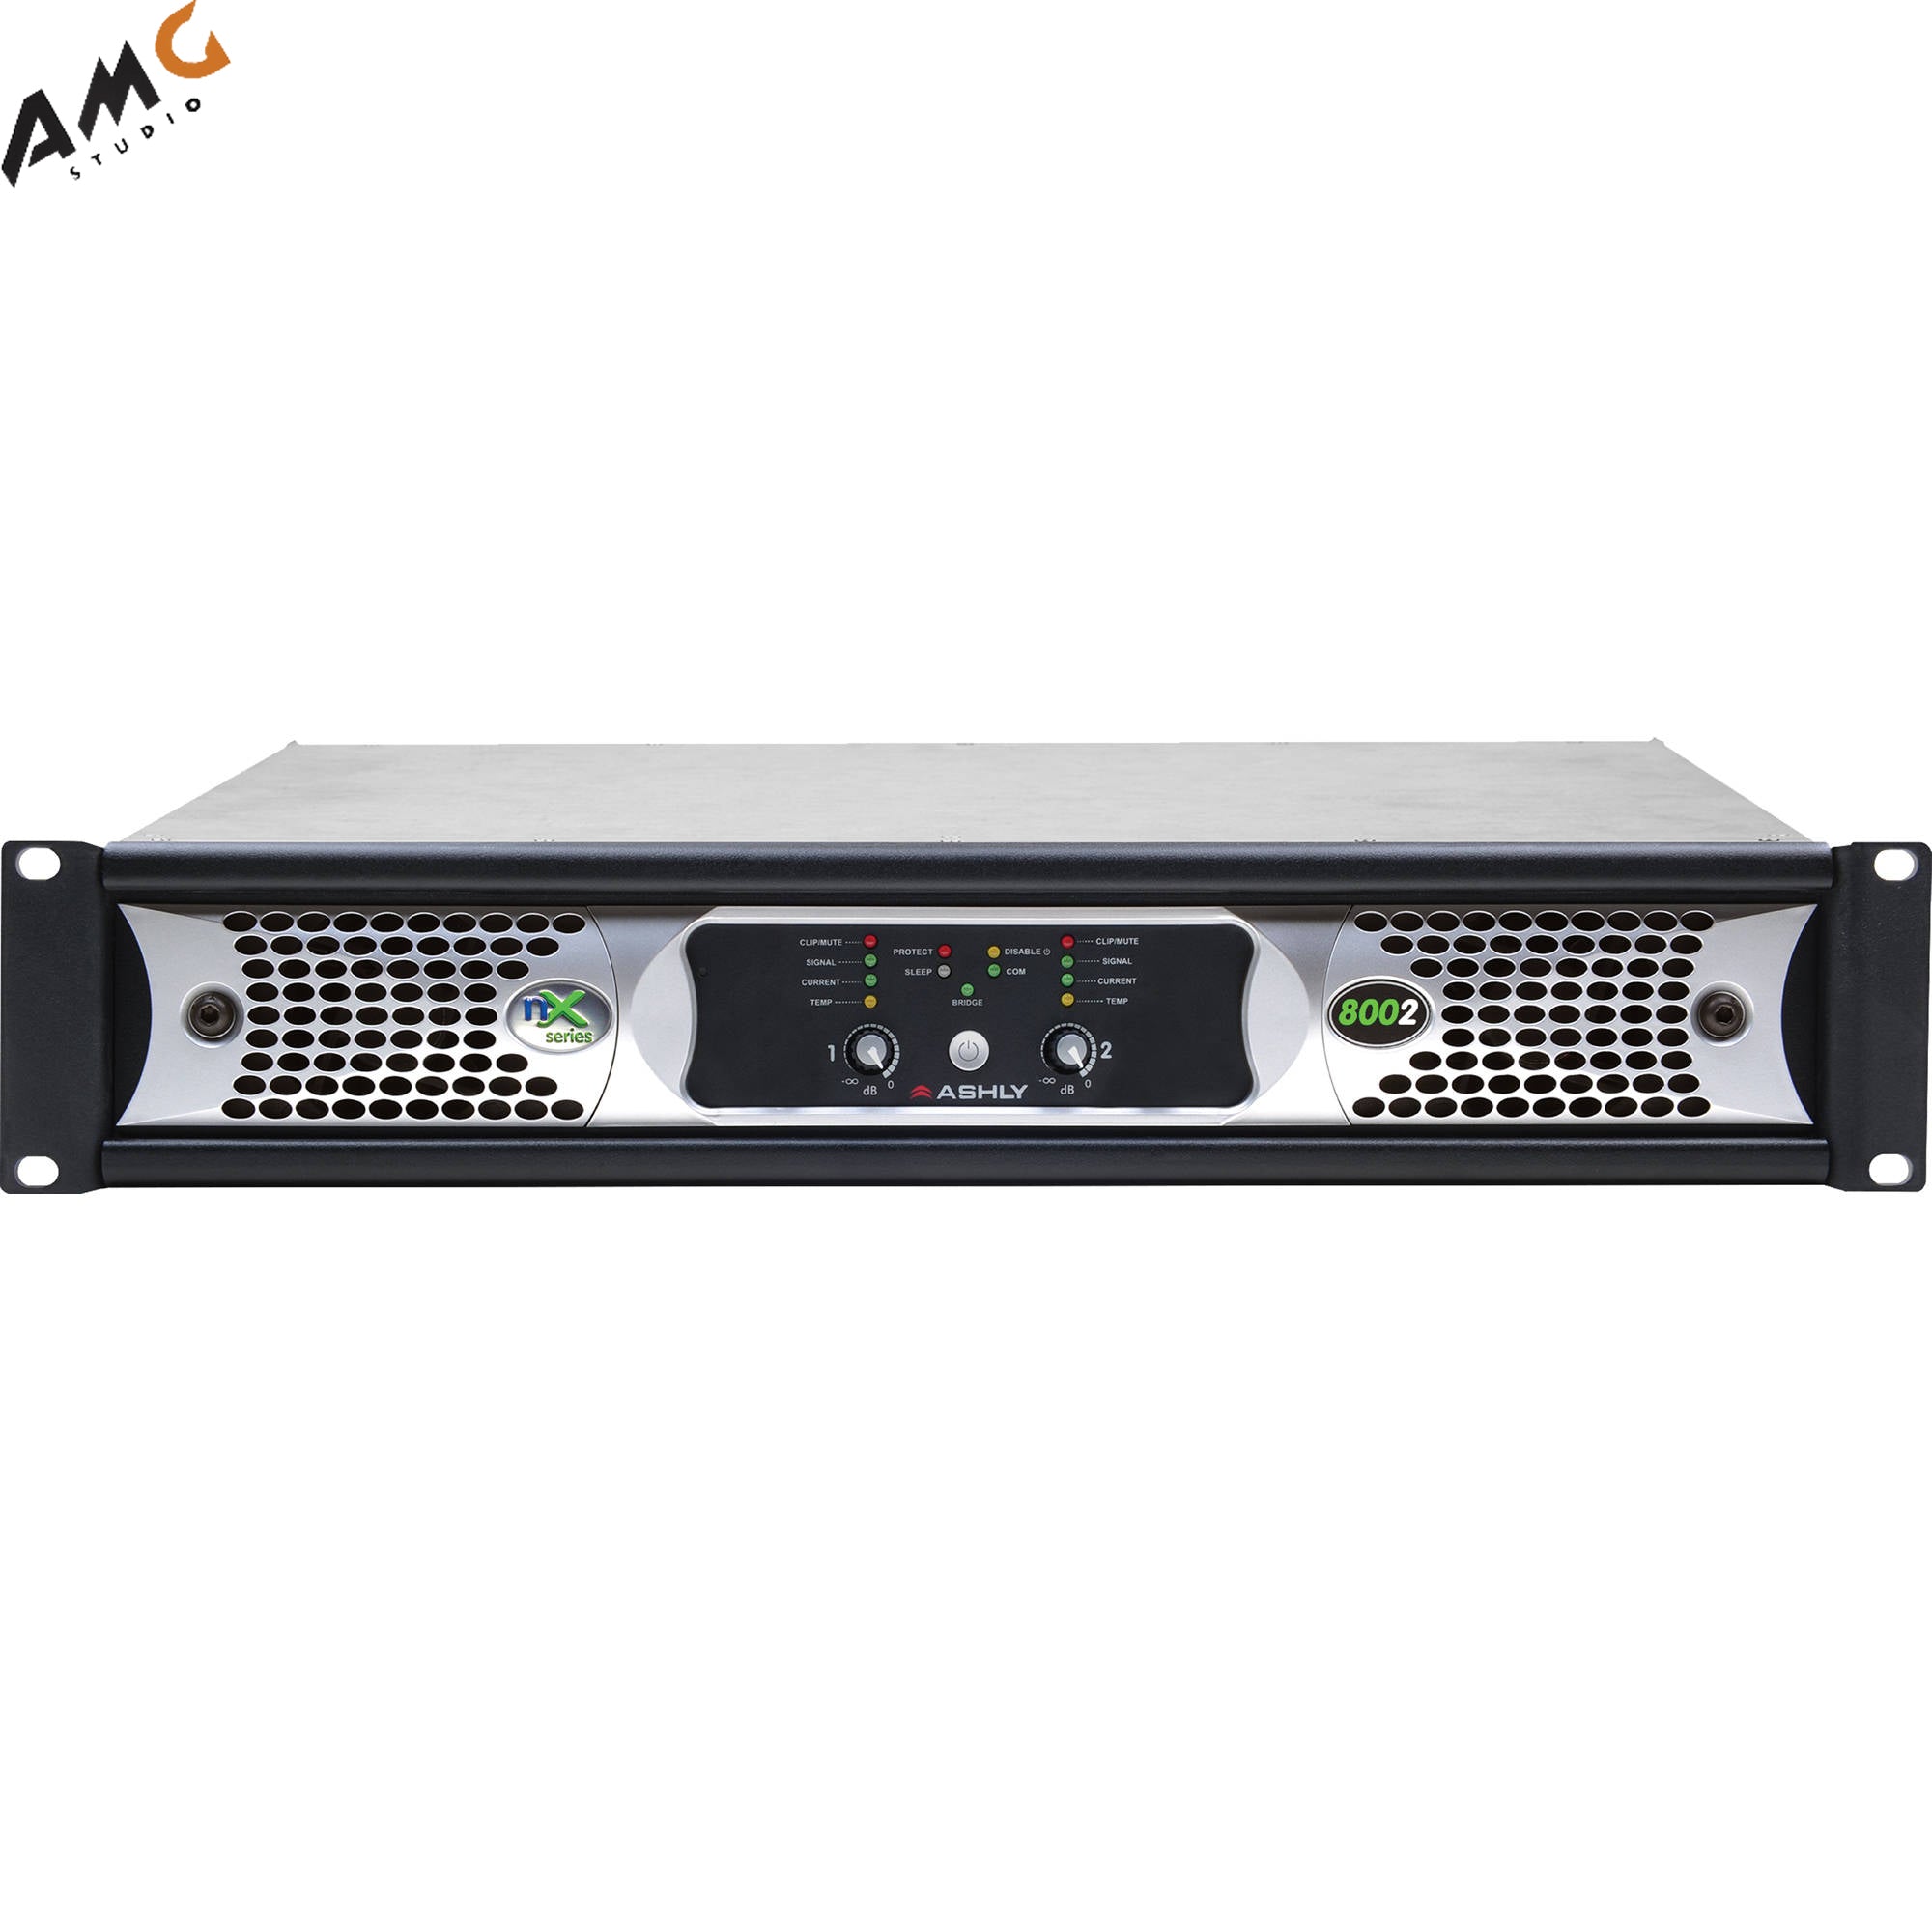 Ashly nX Series NX8002 2-Channel 800W Power Amplifier with Programmable Outputs - Studio AMG